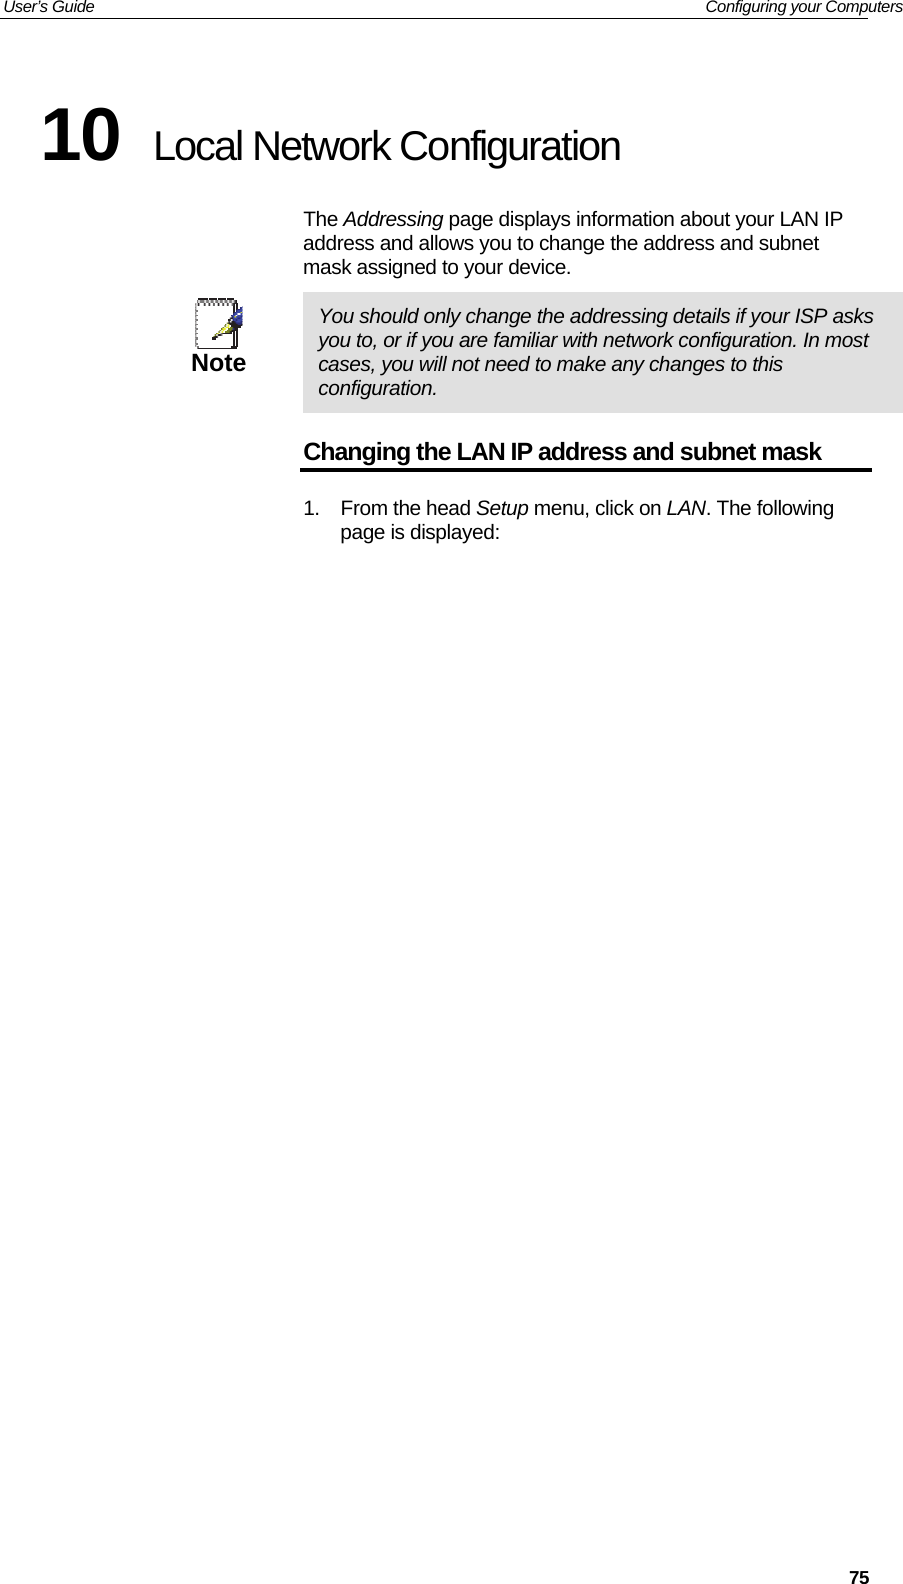 User’s Guide   Configuring your Computers  7510  Local Network Configuration The Addressing page displays information about your LAN IP address and allows you to change the address and subnet mask assigned to your device.  Note  You should only change the addressing details if your ISP asks you to, or if you are familiar with network configuration. In most cases, you will not need to make any changes to this configuration. Changing the LAN IP address and subnet mask 1. From the head Setup menu, click on LAN. The following page is displayed: 